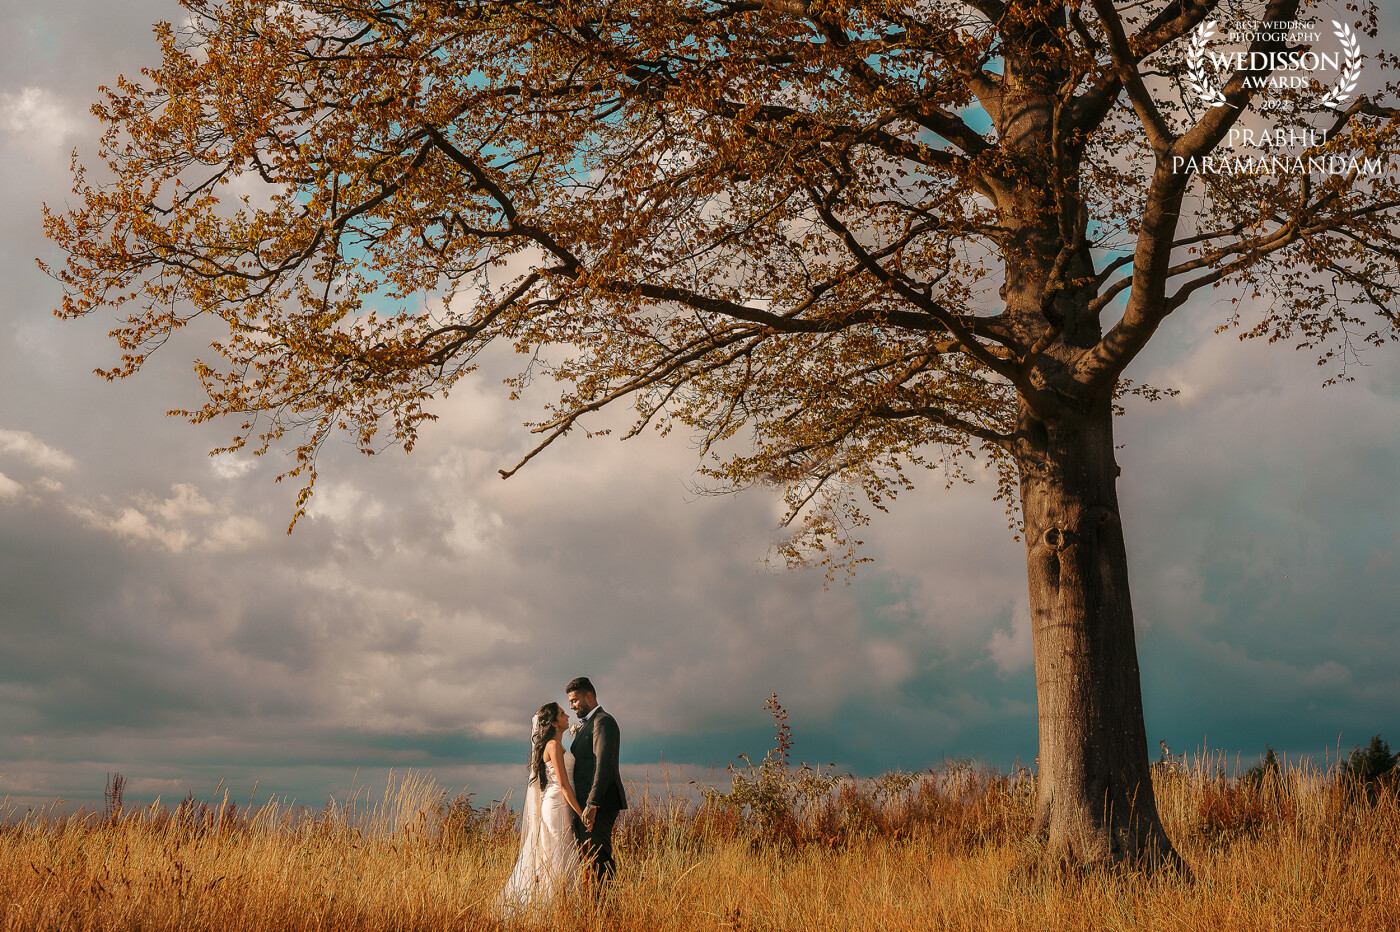 The tree was standing alone in the big grass fields and to have the couple beneath it made a perfect frame. I was very far away from the couple and shot this from a wide angle.